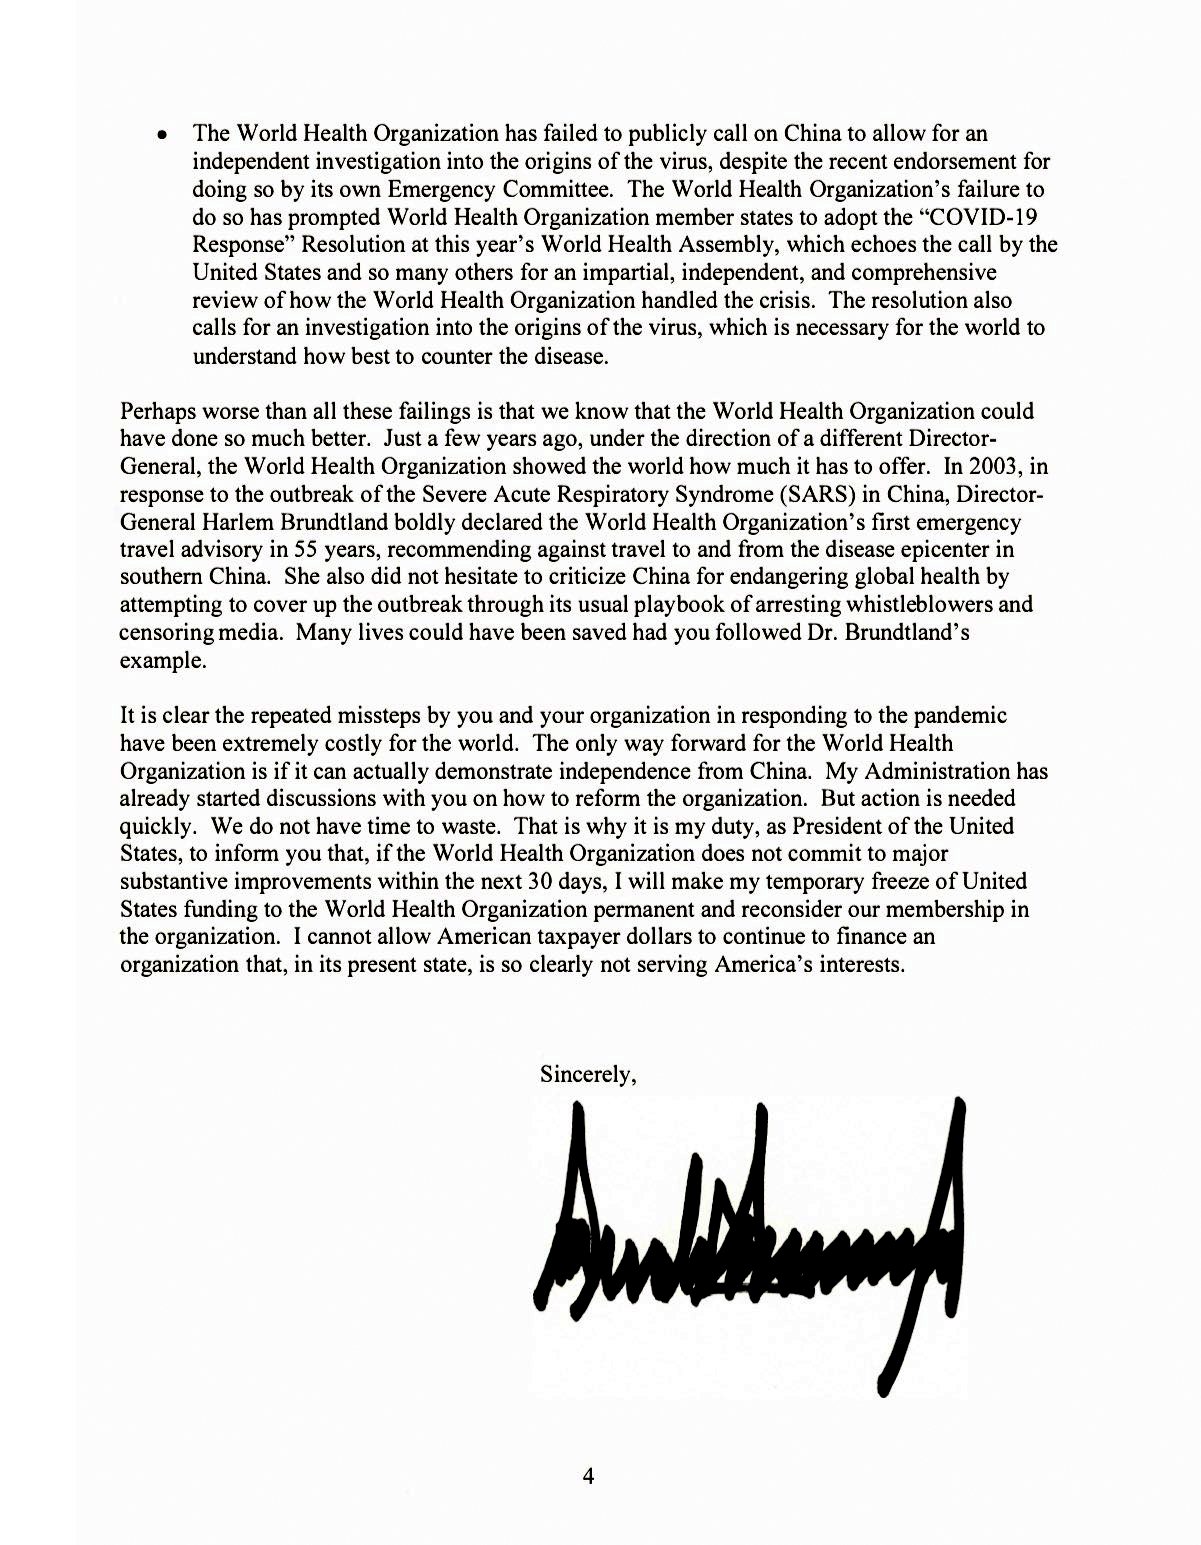 Trump's letter to WHO May 18, 2020, page 4